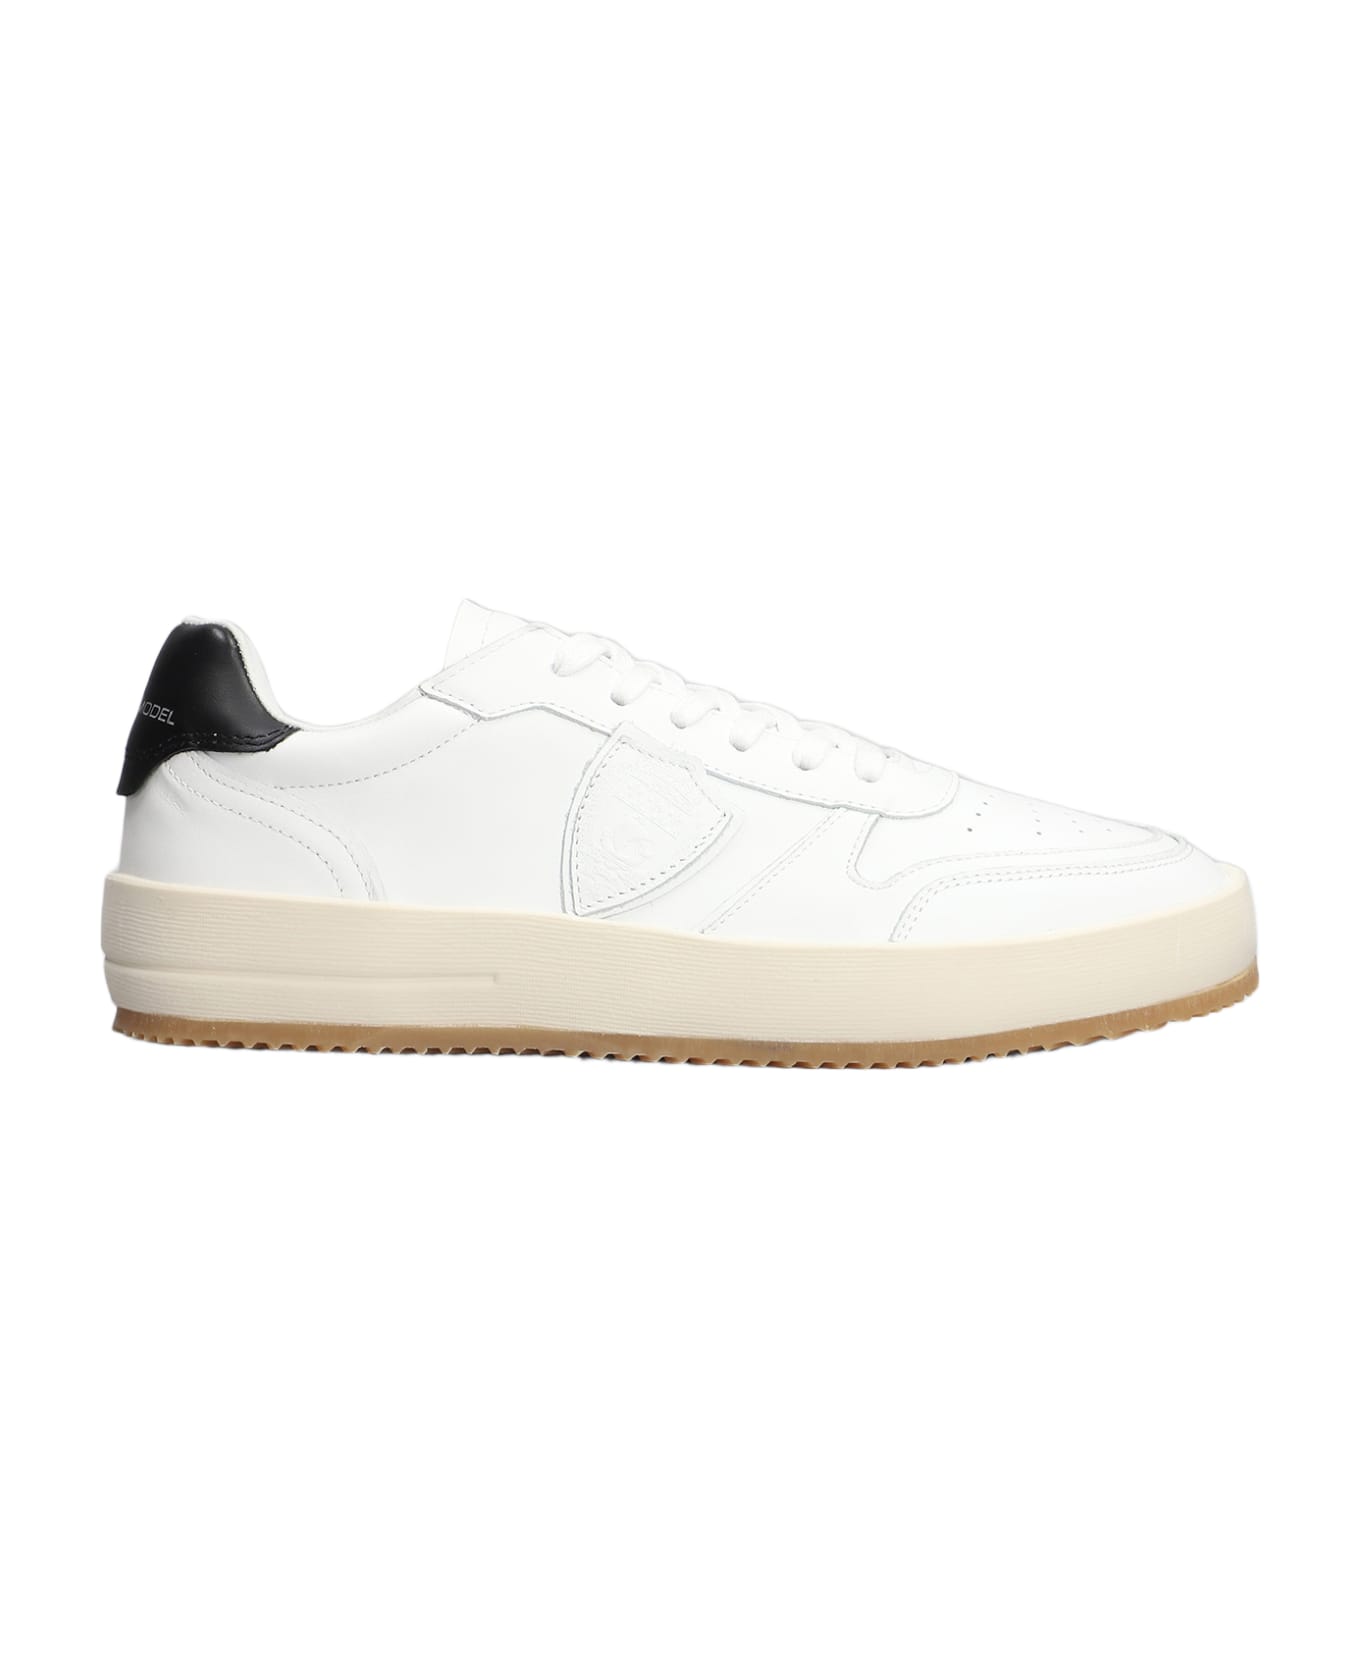 Philippe Model Nice Low Sneakers In White Leather - white